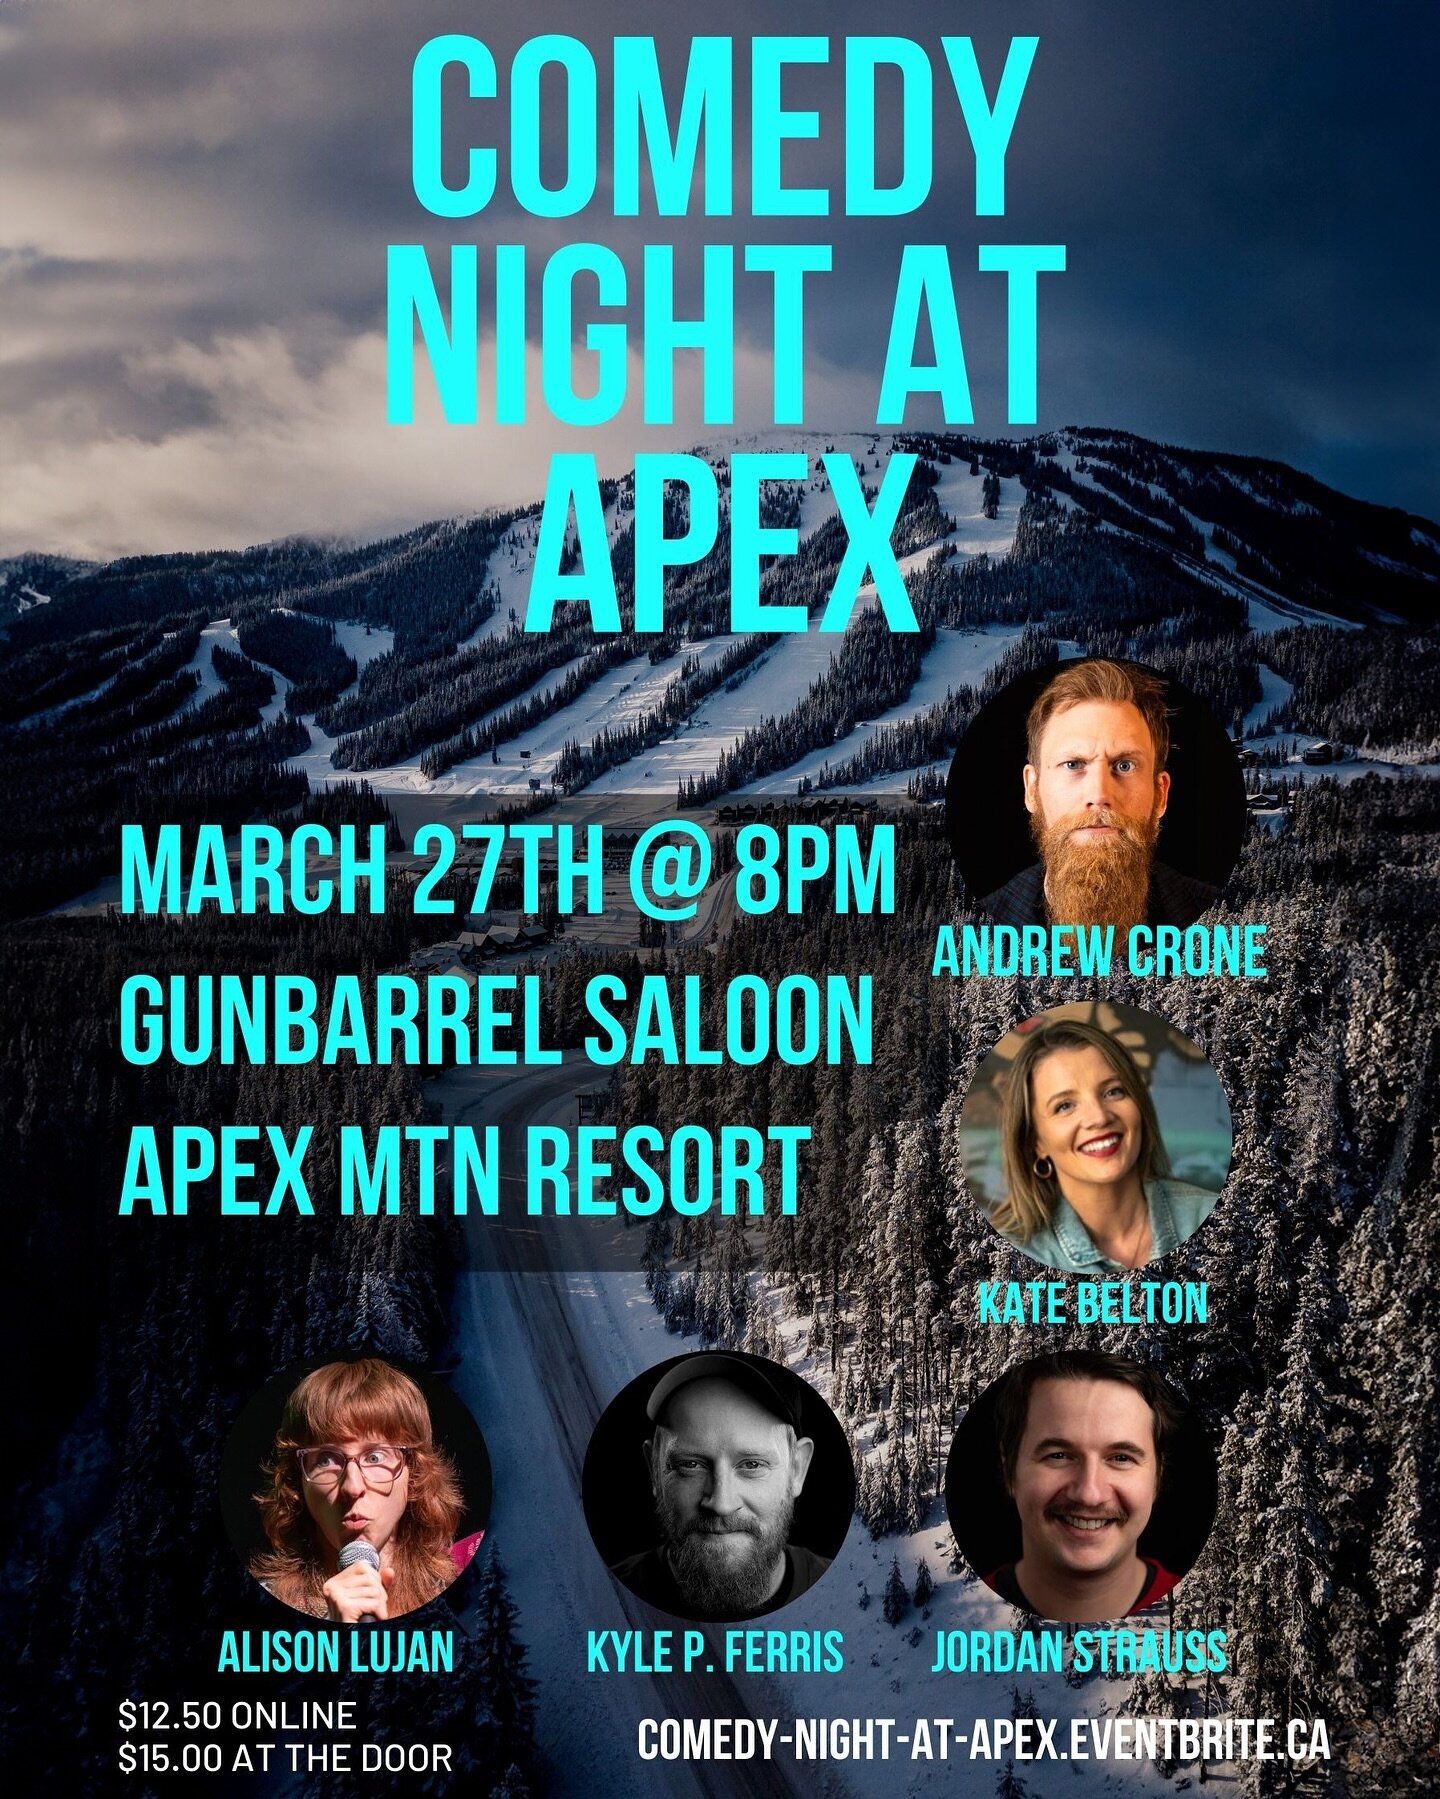 Some serious talent is coming to the mountain! I&rsquo;ve wanted to organize a show at @apexmtnresort for a while now and what better way to end the season than with a night of high altitude hilarity. Find tickets in my comedy story highlights and co